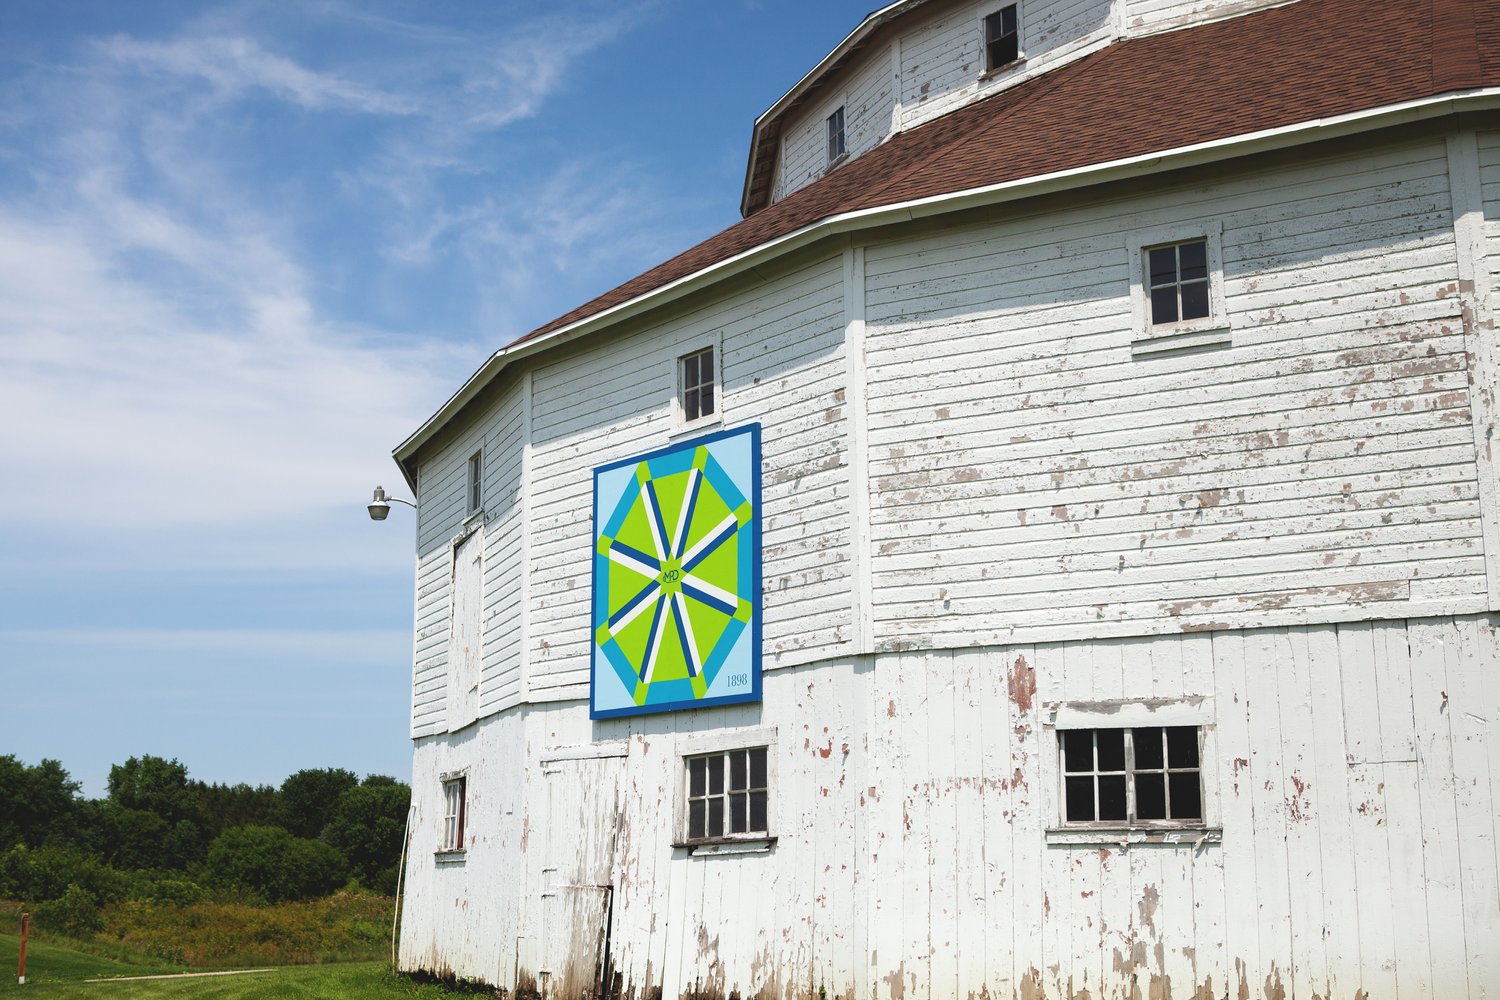 Will County Barn Quilt Trail